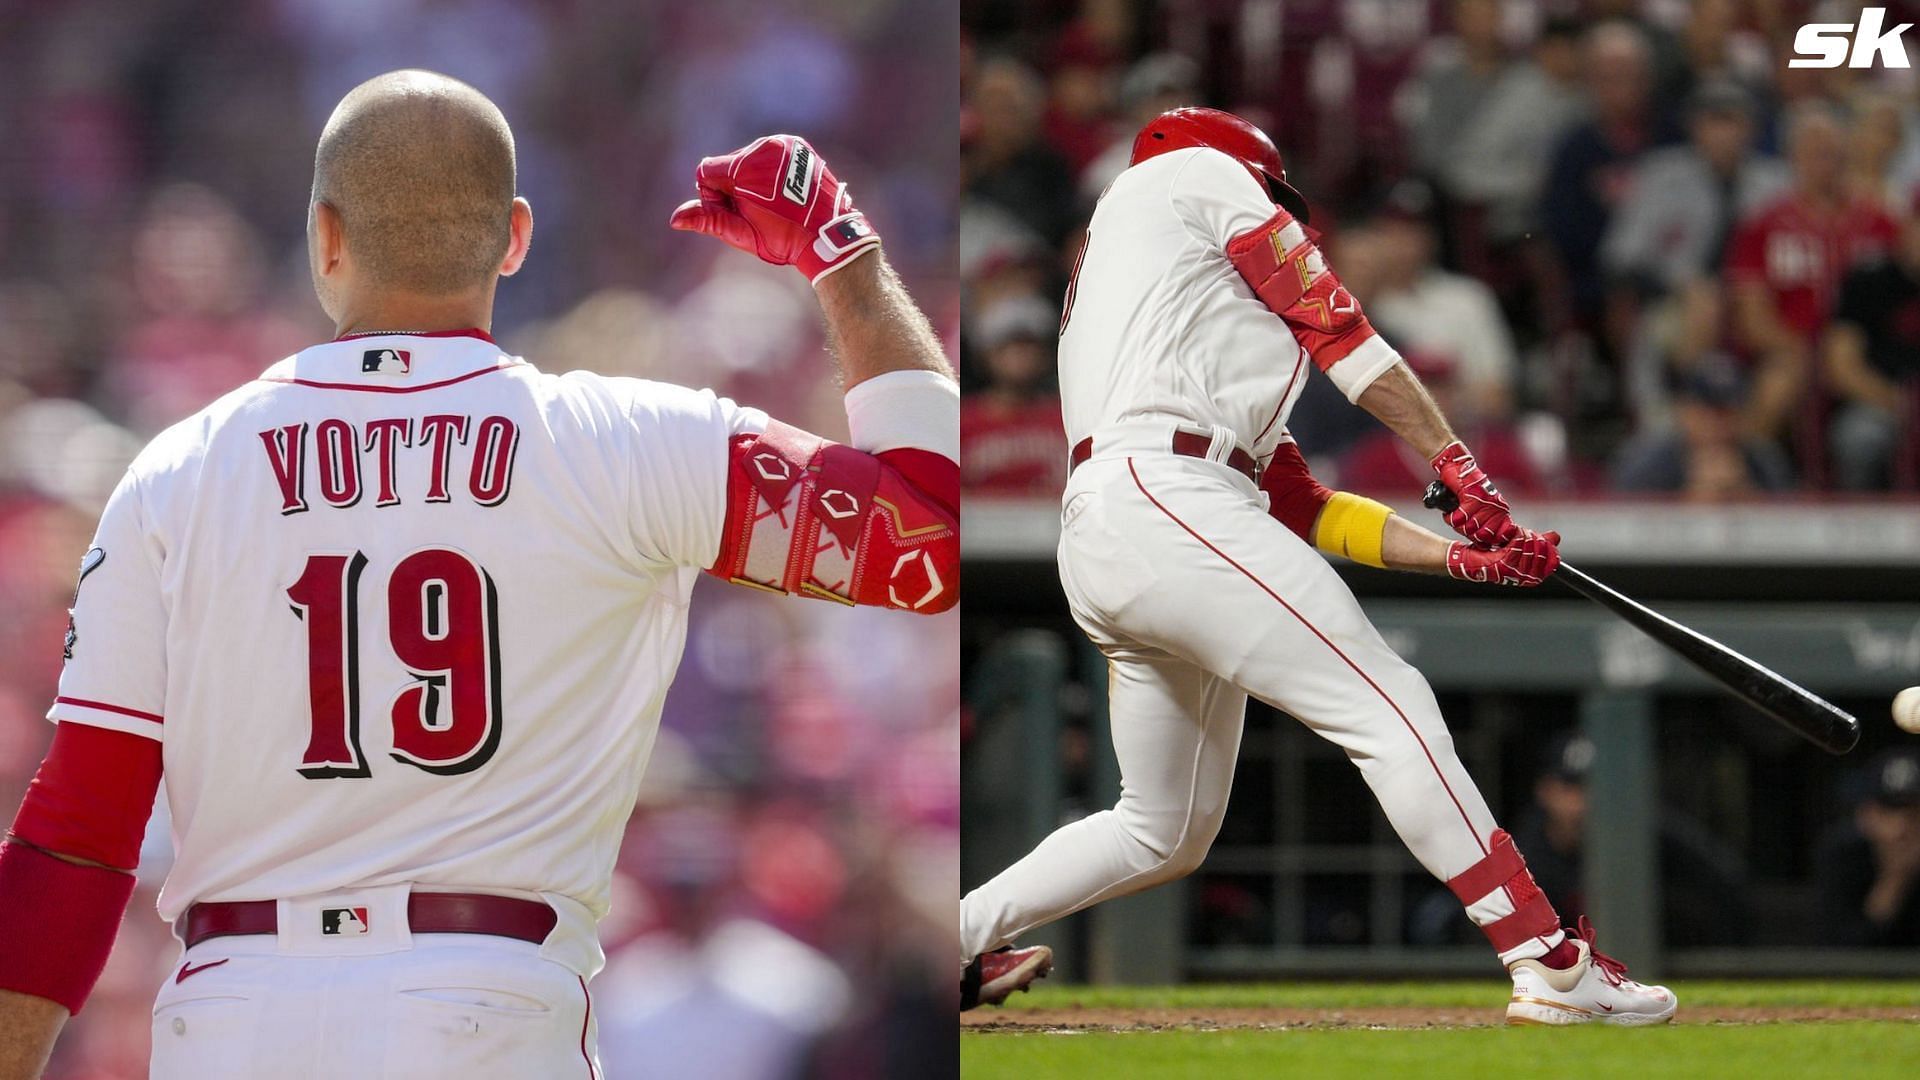 Reds fans react to Joey Votto's return